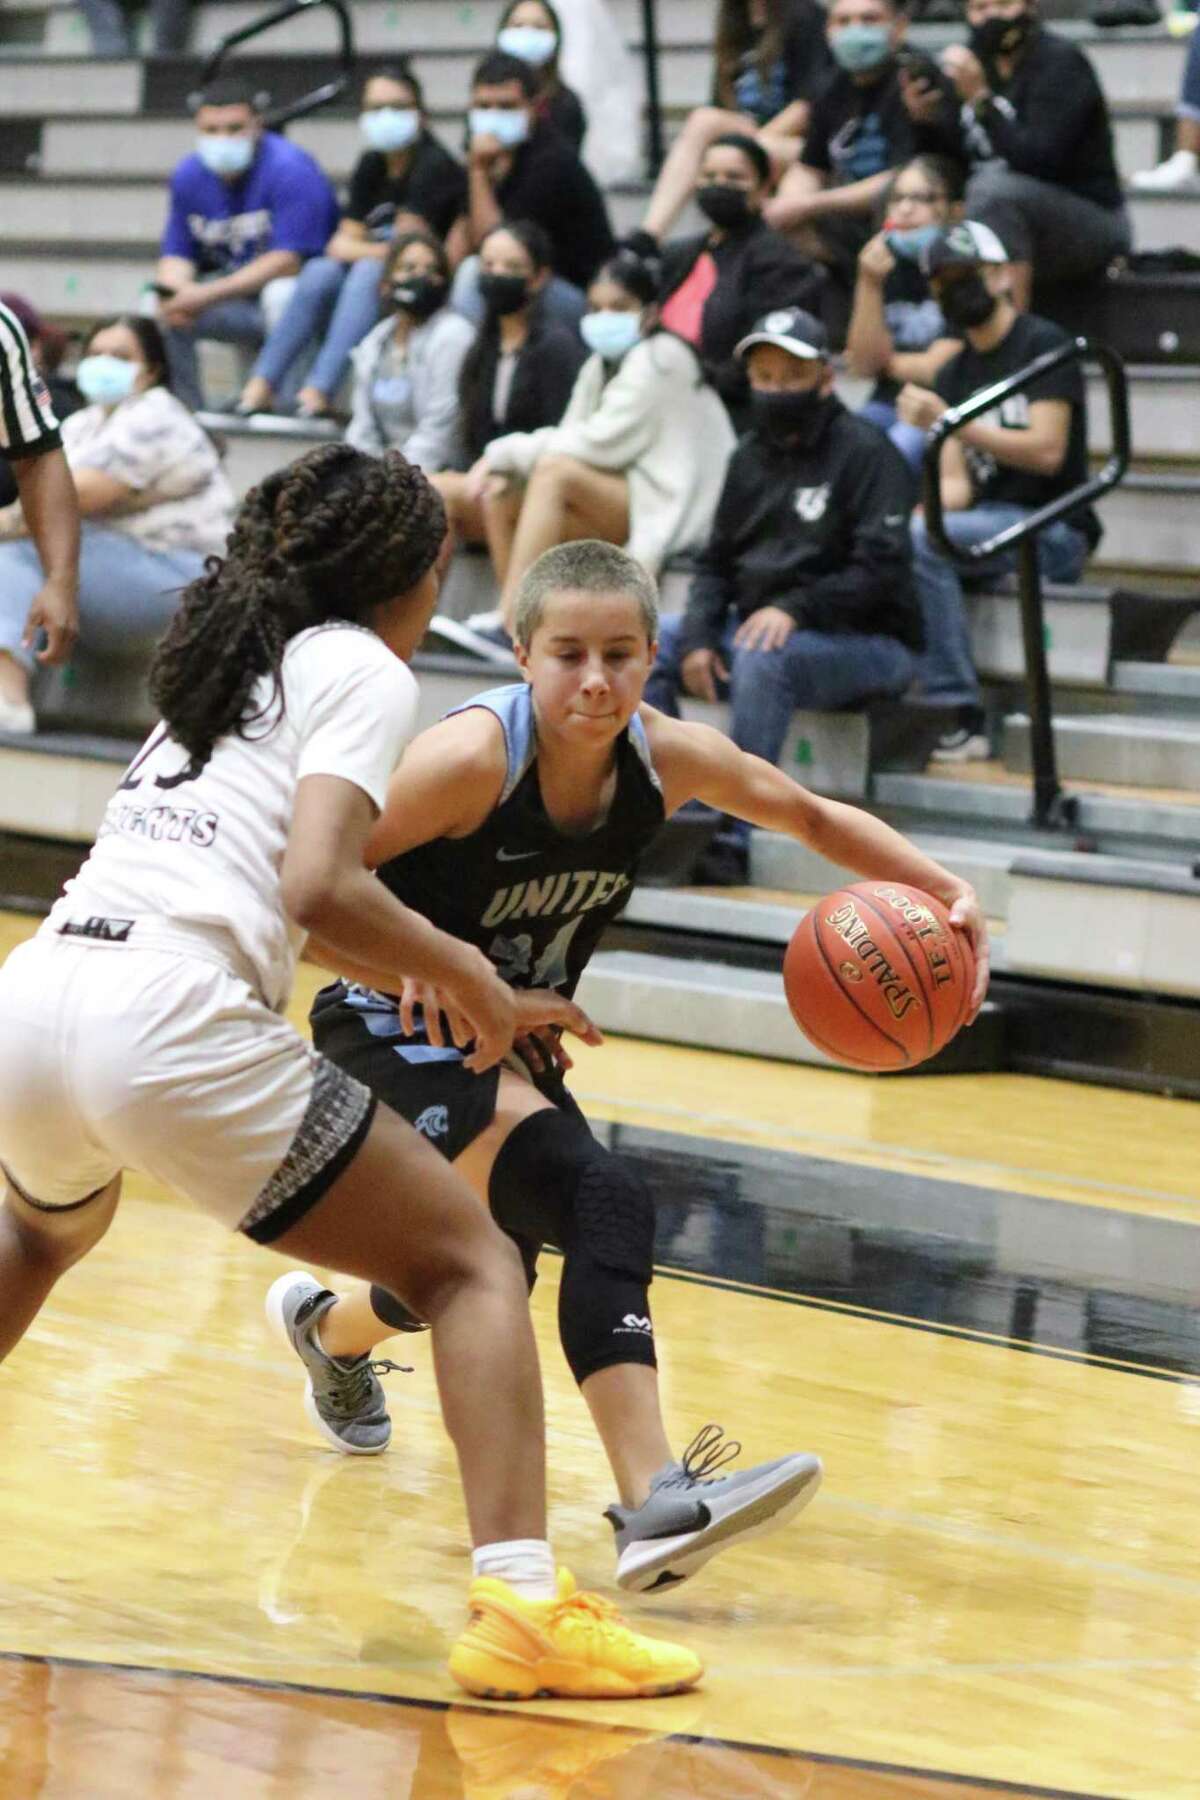 The United South Lady Panthers picked up their first win of the season as they defeated Edinburg on Saturday.